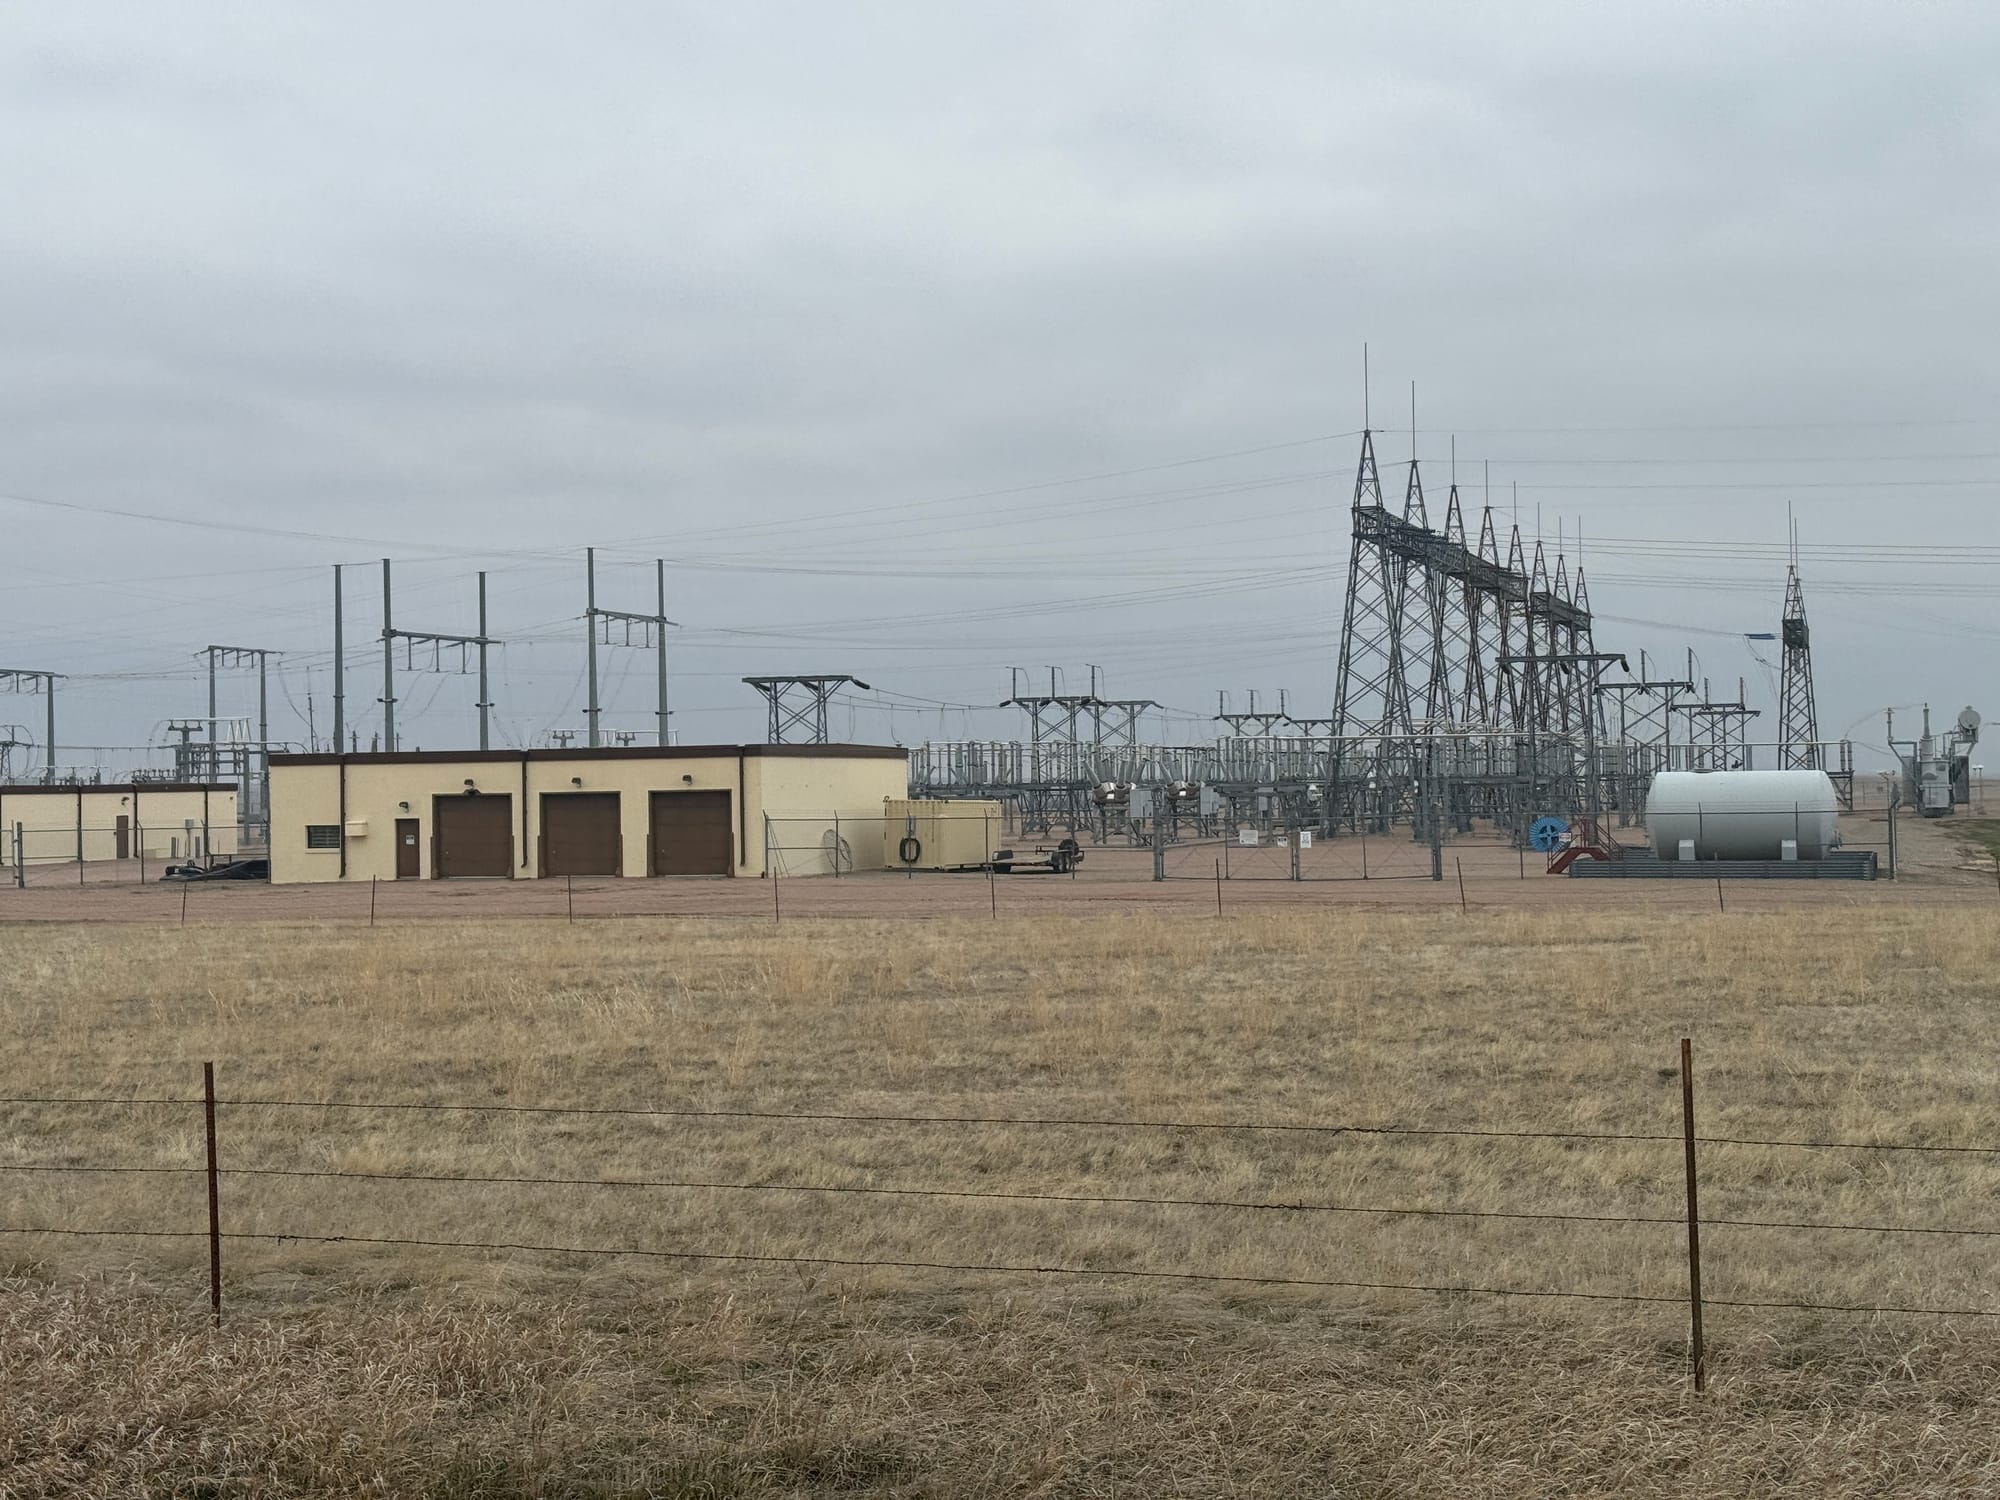 Electrical grids at the Wild Springs Solar Project in New Underwood, South Dakota.